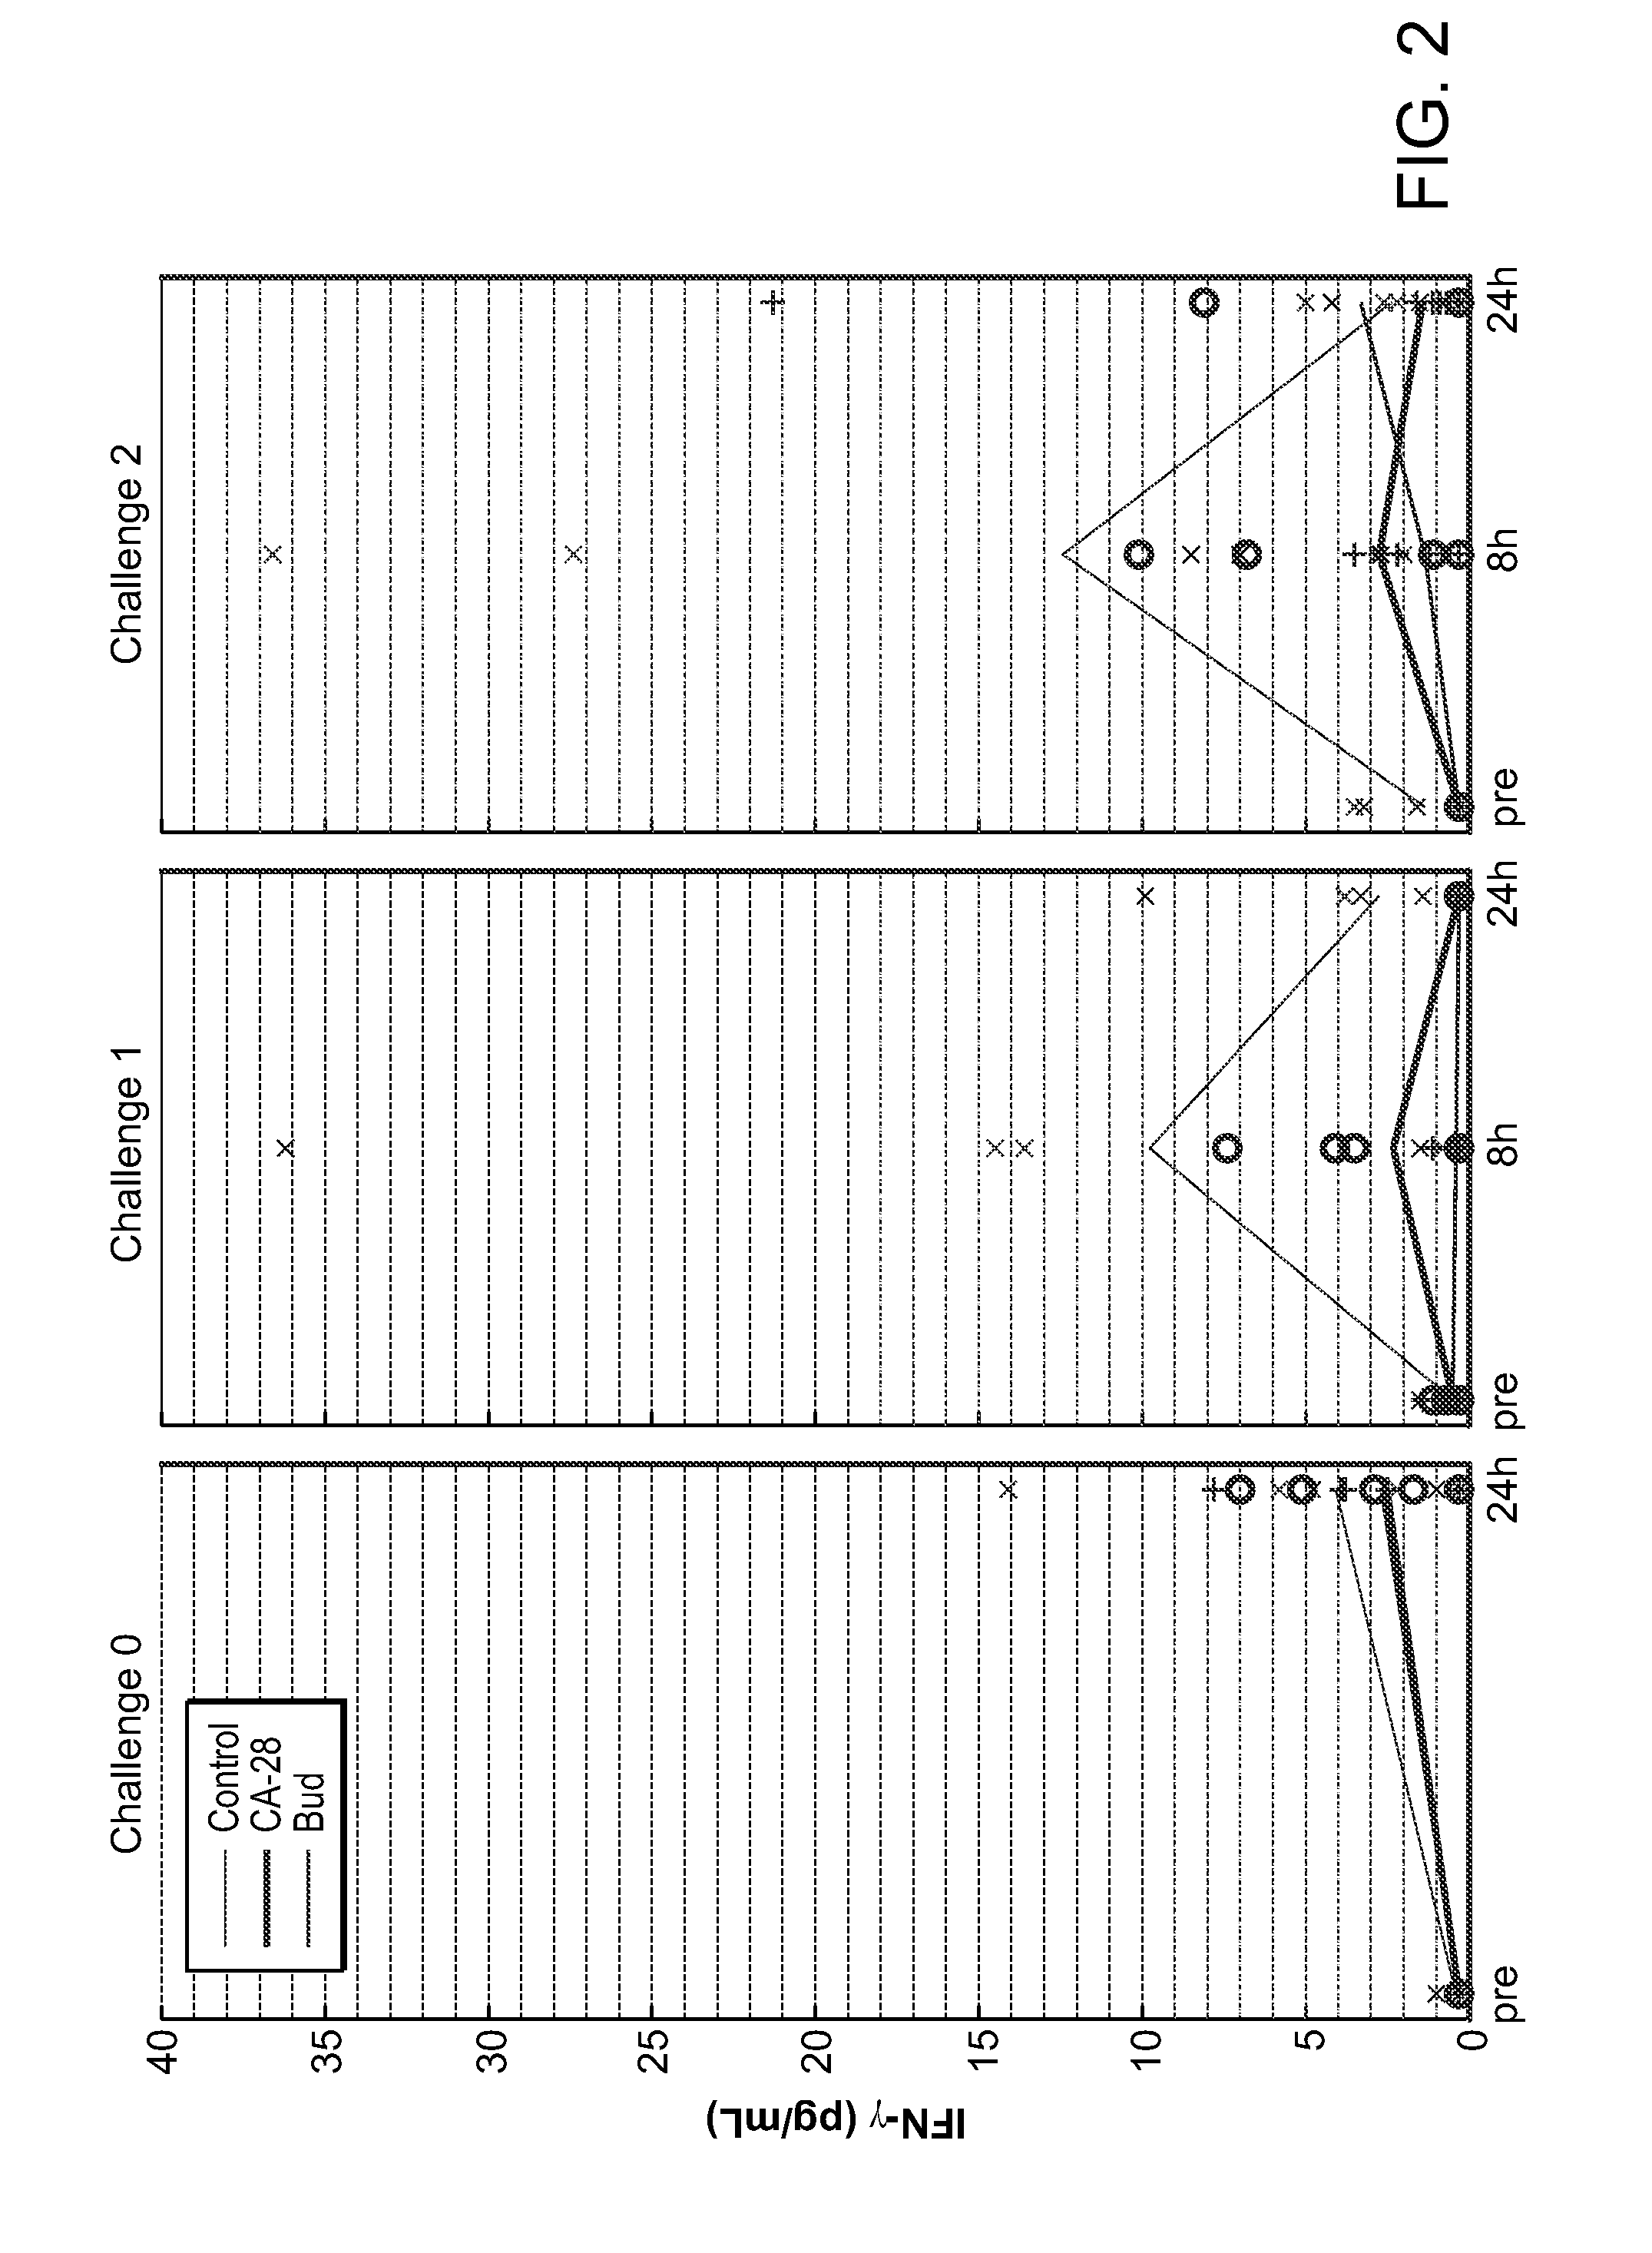 Methods of treating chronic disorders with complement inhibitors